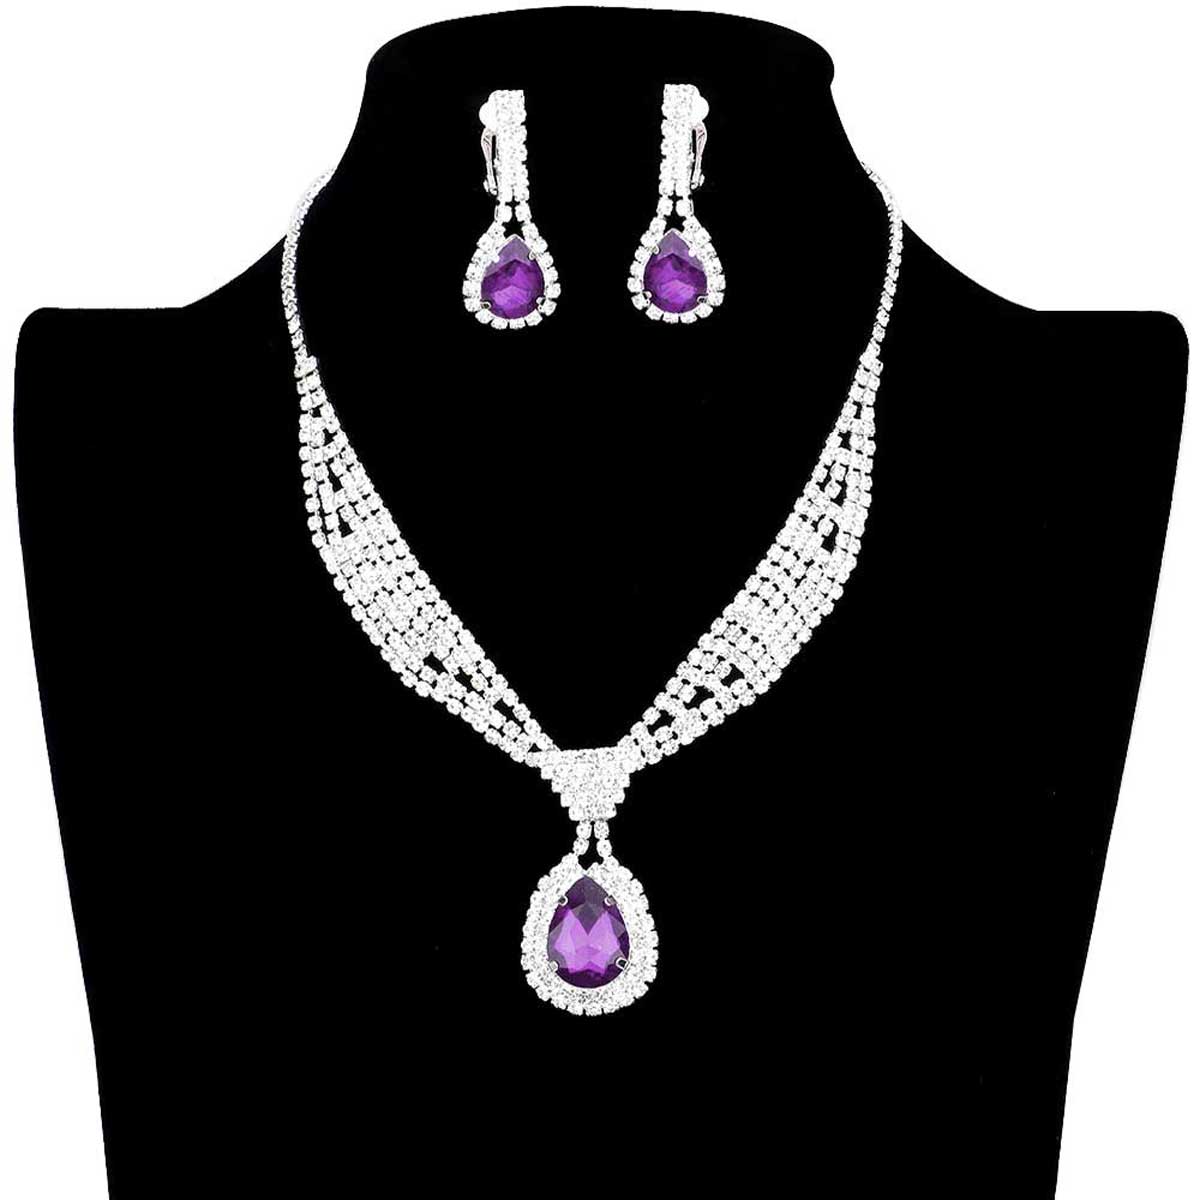 Purple Rhinestone Pave Teardrop Collar Necklace & Clip Earring Set, stunning jewelry set will sparkle all night long making you shine out like a diamond. perfect for a night out on the town or a black tie party, Perfect Gift, Birthday, Anniversary, Prom, Mother's Day Gift, Sweet 16, Wedding, Quinceanera, Bridesmaid.